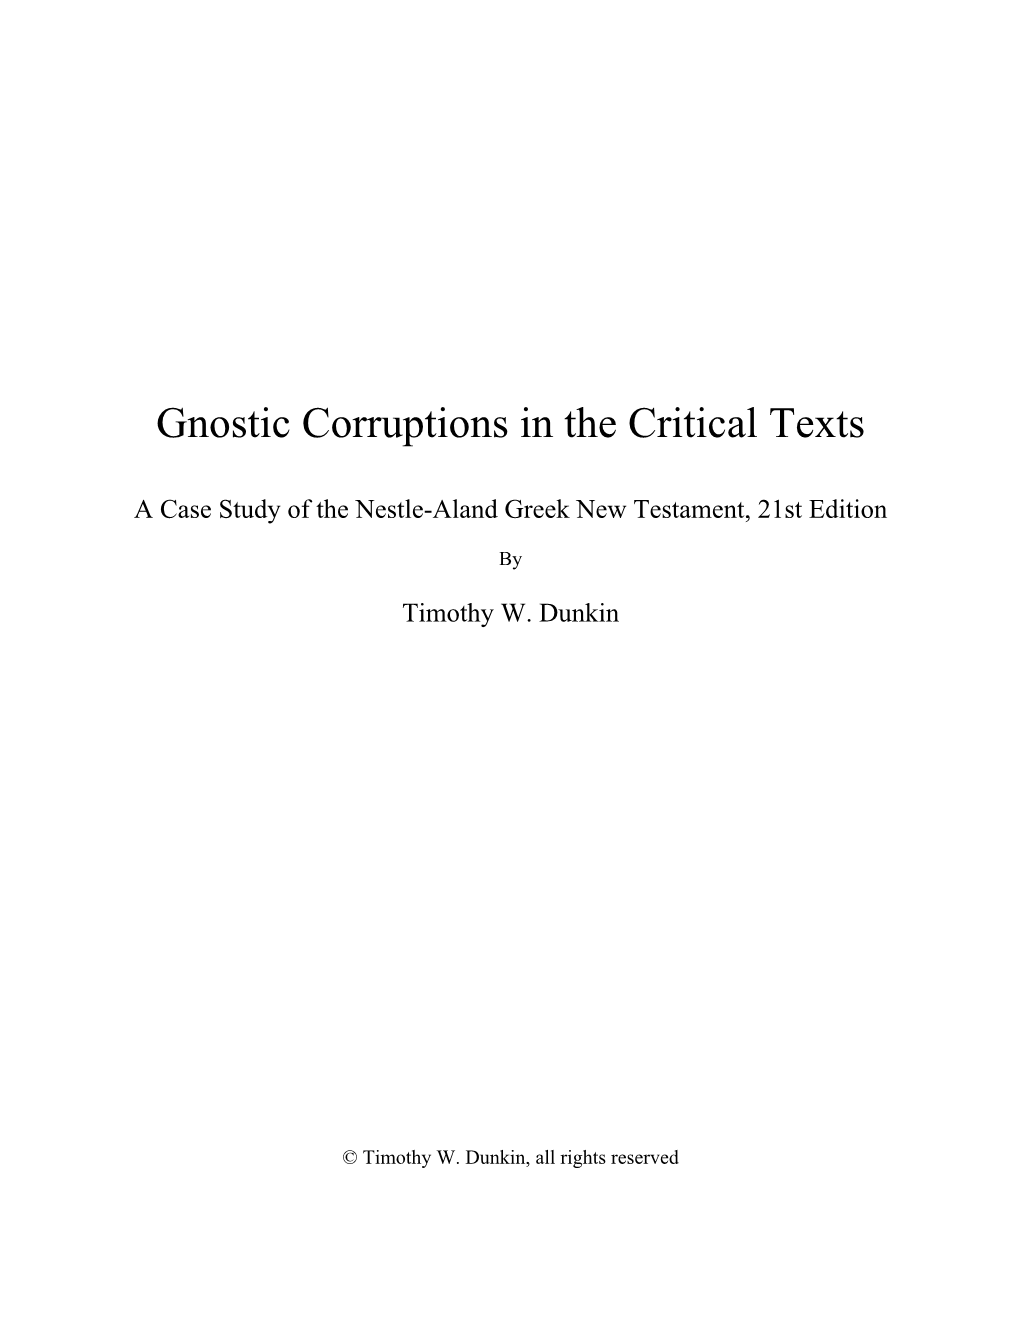 Gnostic Corruptions in the Critical Texts